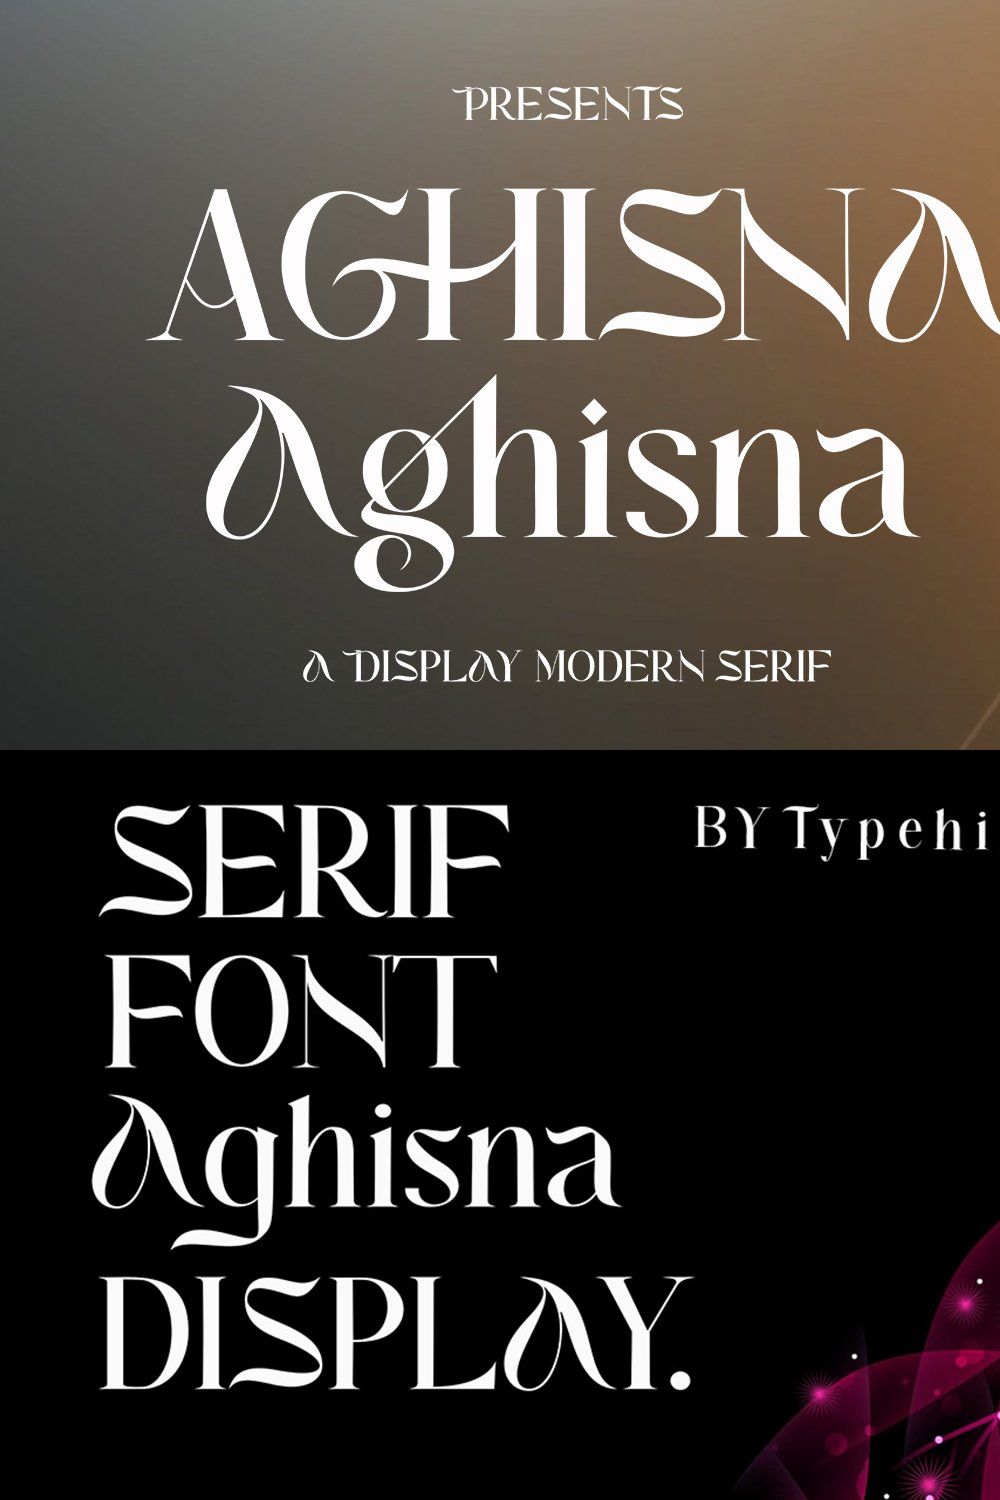 Aghisna Display pinterest preview image.